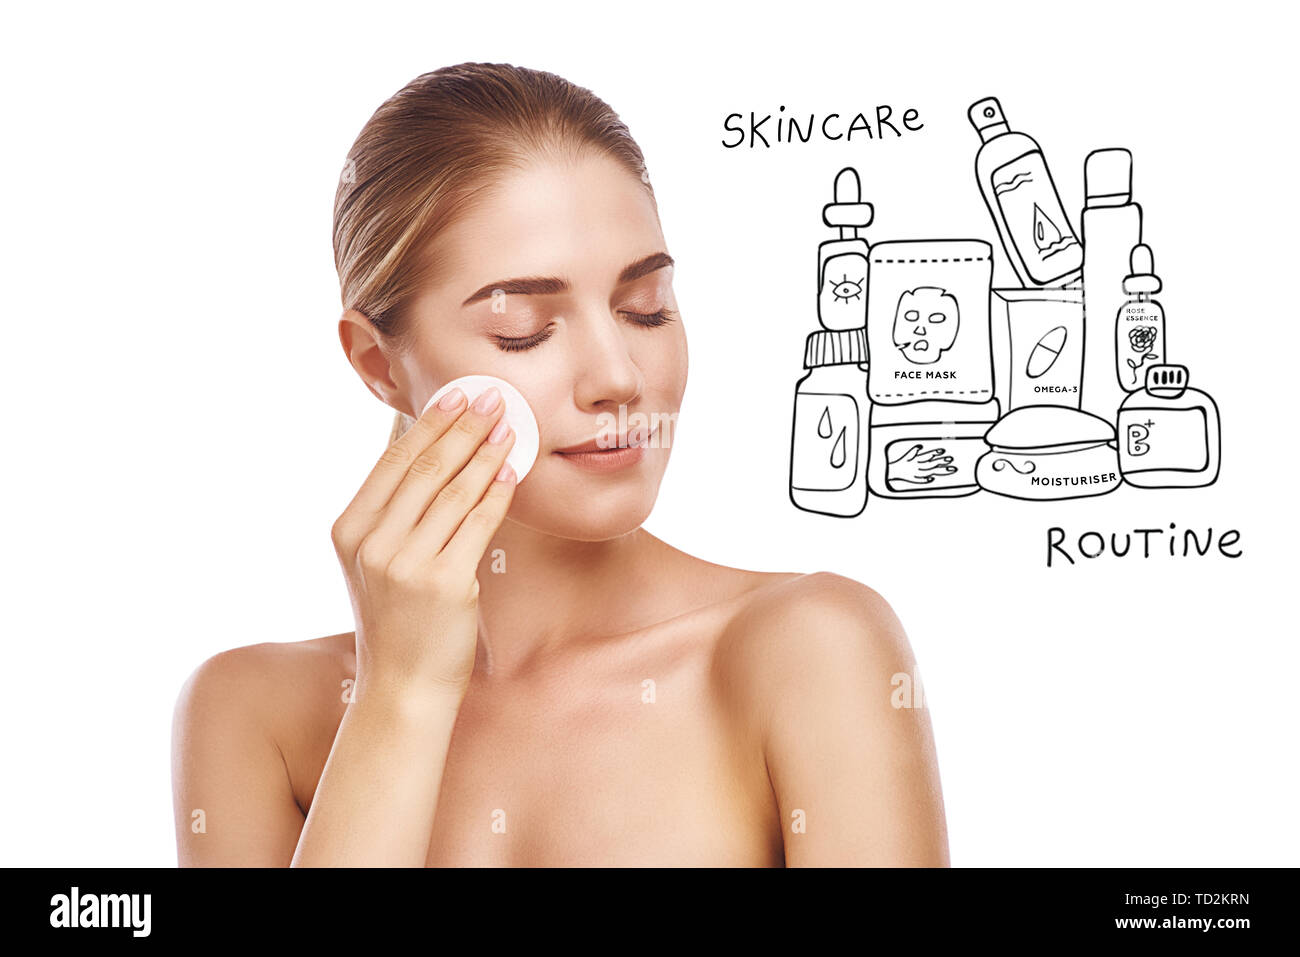 Your daily skincare routine. Portrait of pretty young woman removing makeup from her face with cotton pad while standing against white background with Stock Photo